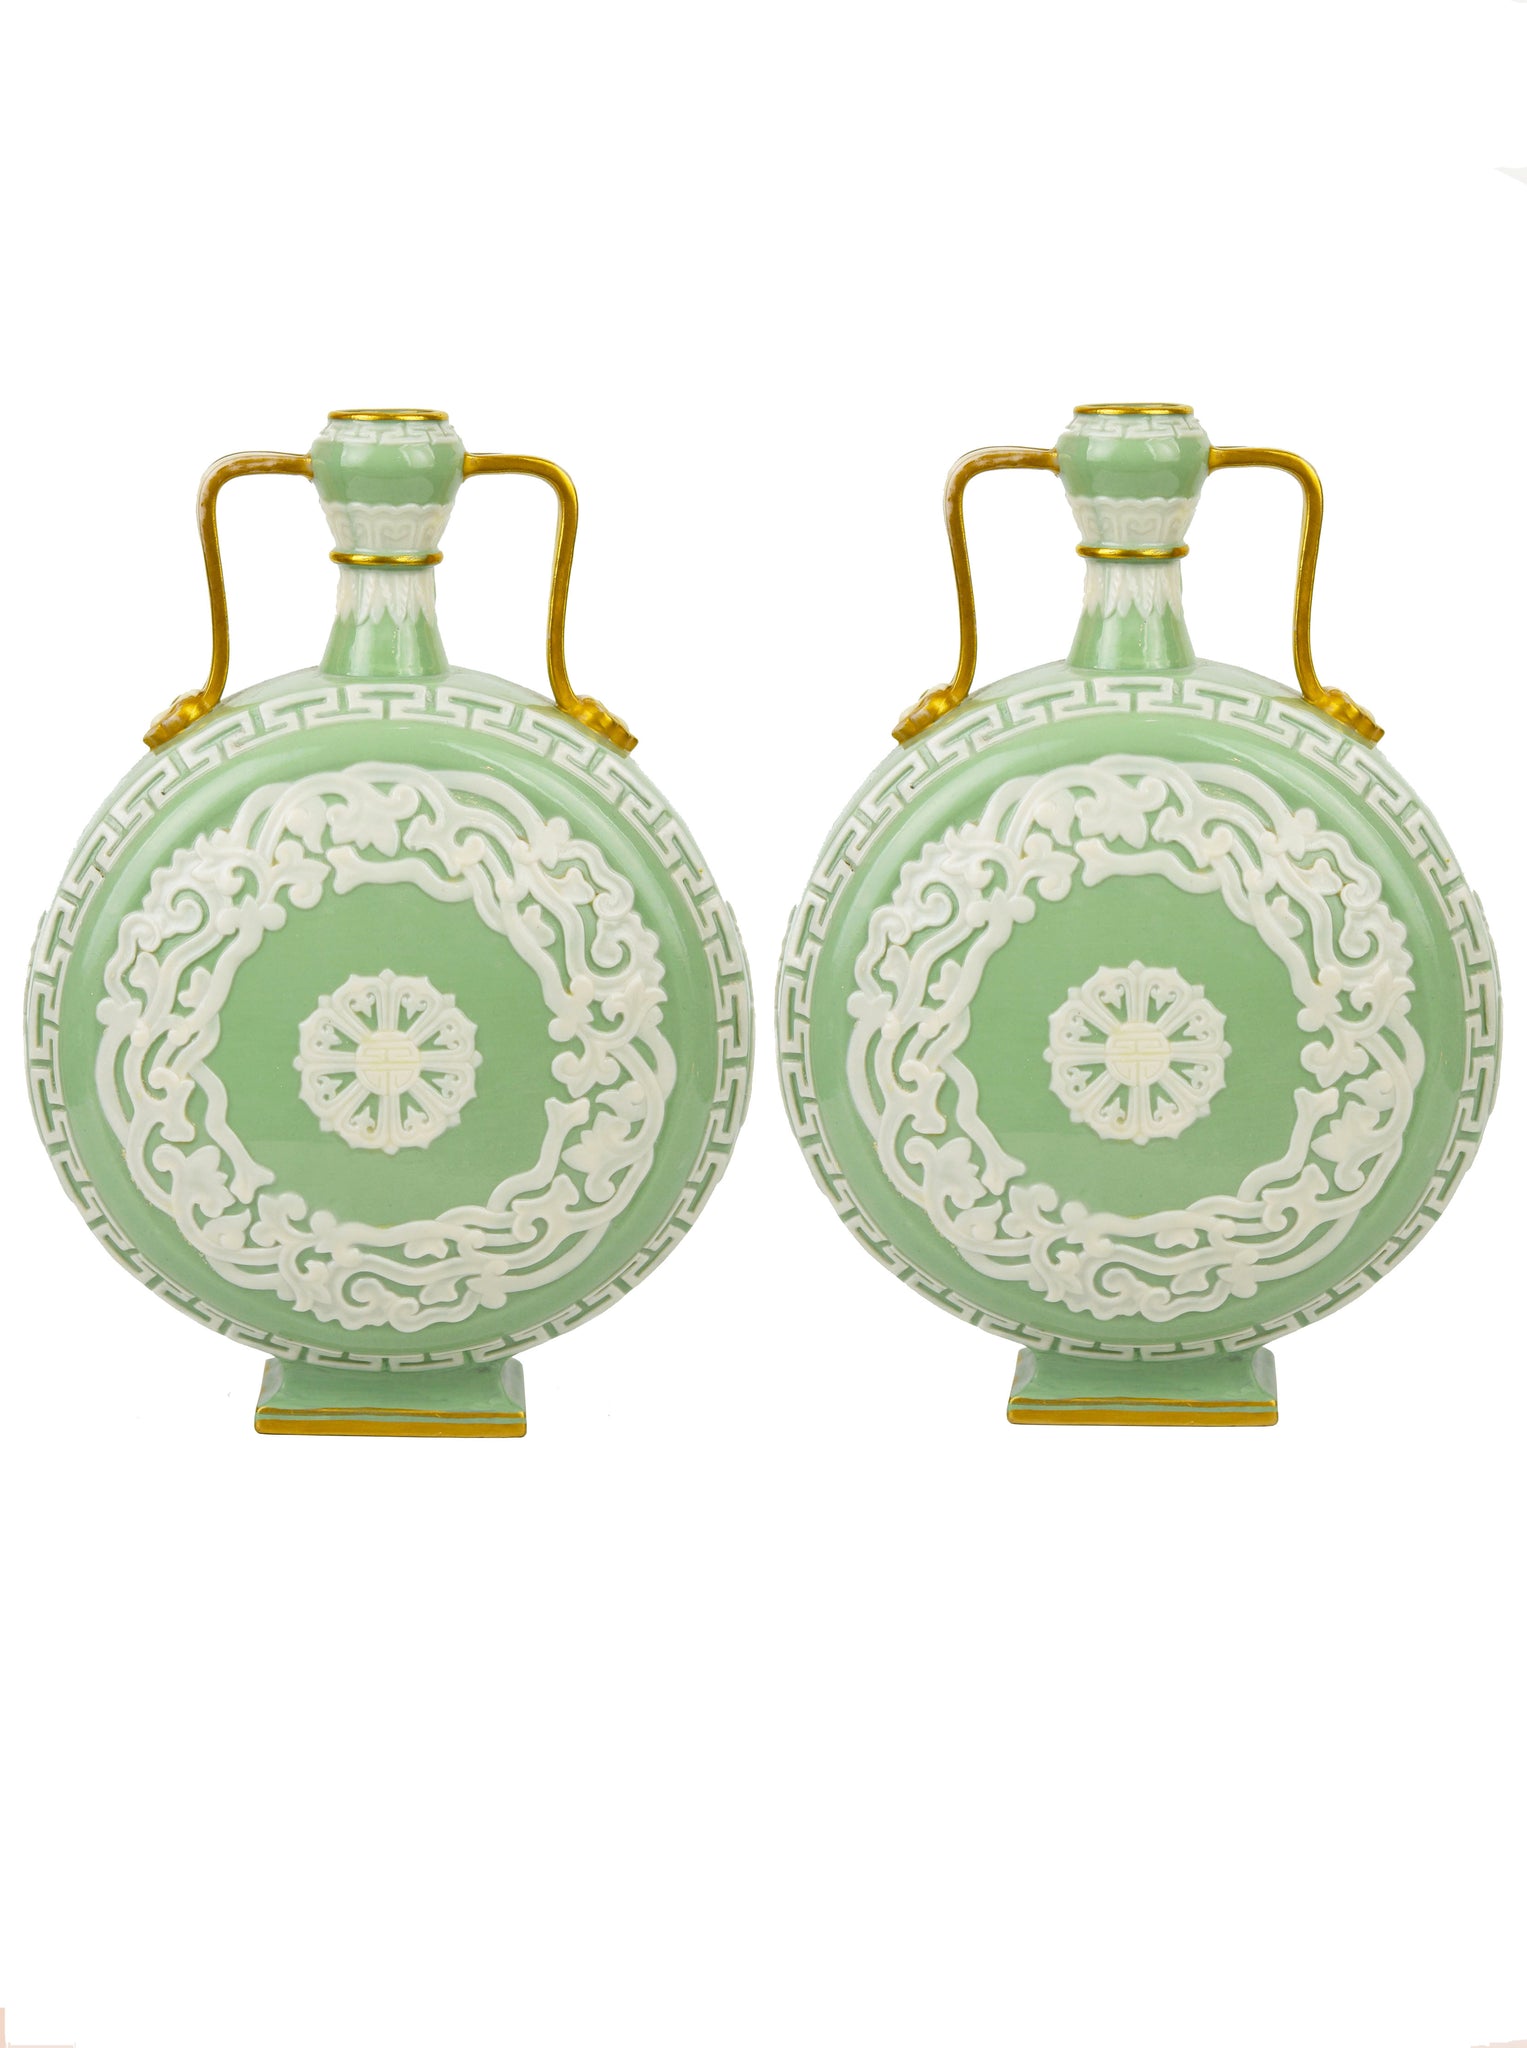 Pair Of Royal Worcester Porcelain Aesthetic Movement Chinese Style Celadon Moonflasks c.1875 Vases